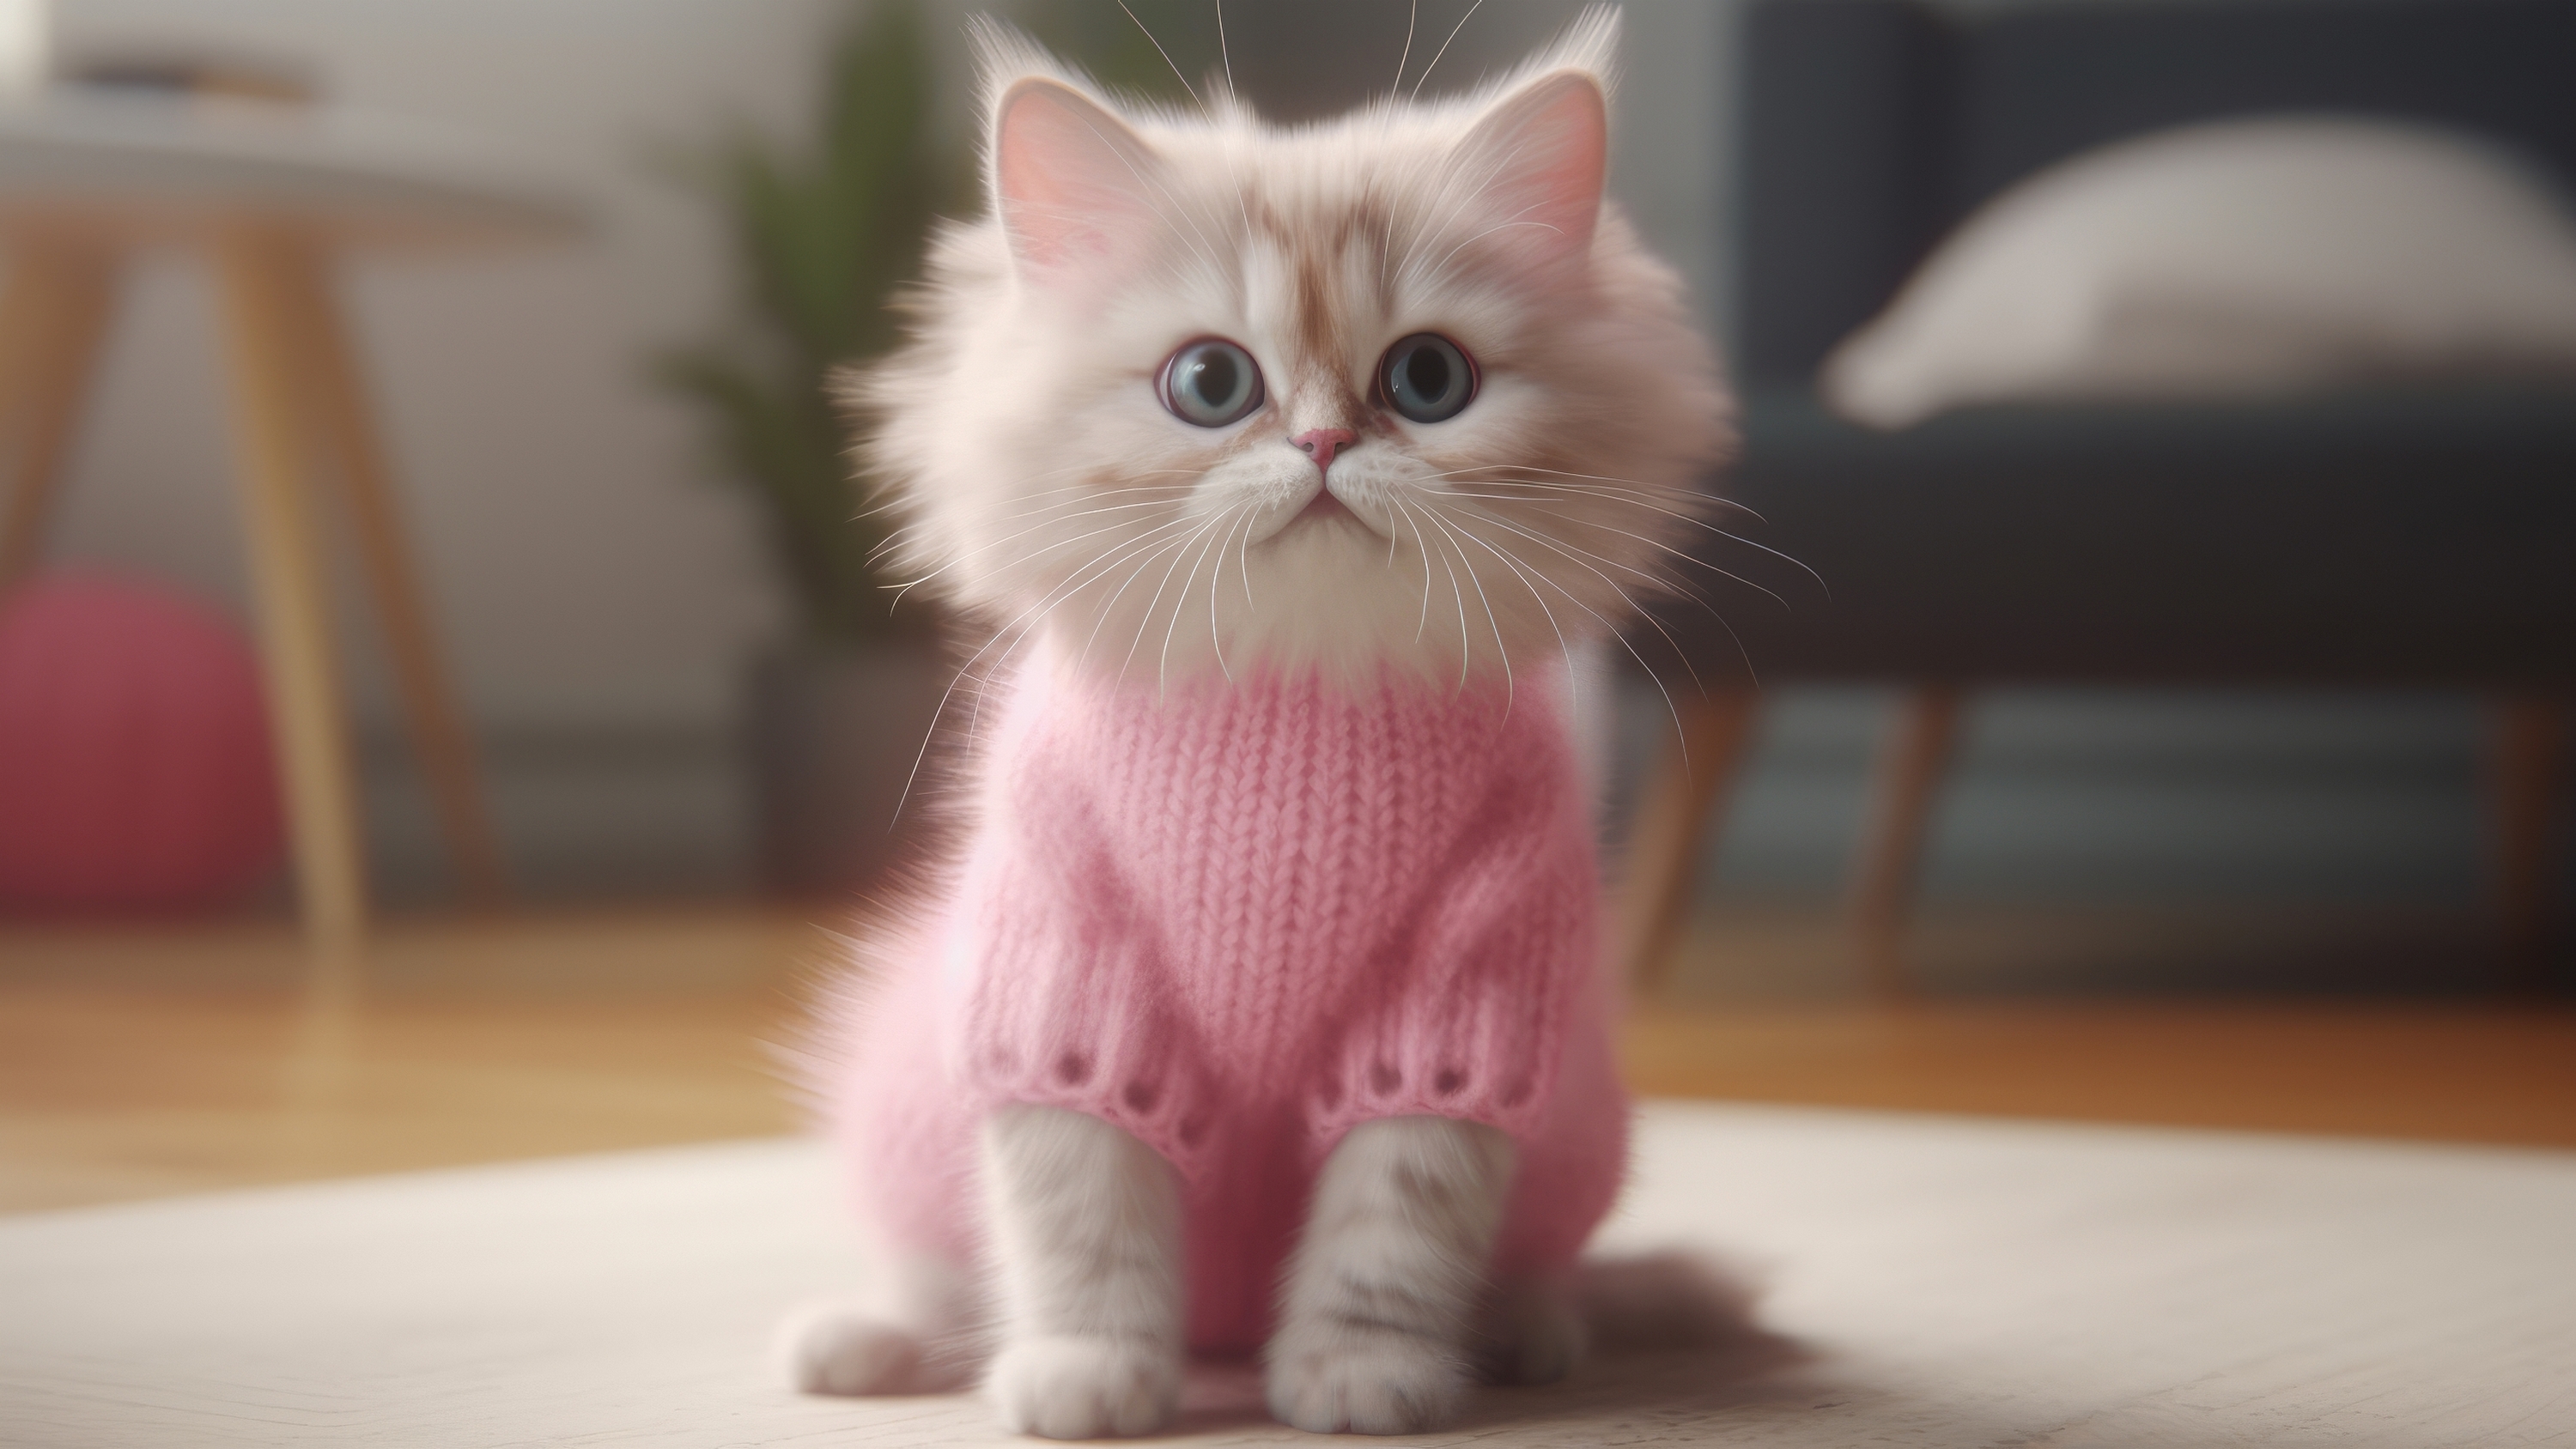 Drawing of a fluffy kitten in a pink sweater